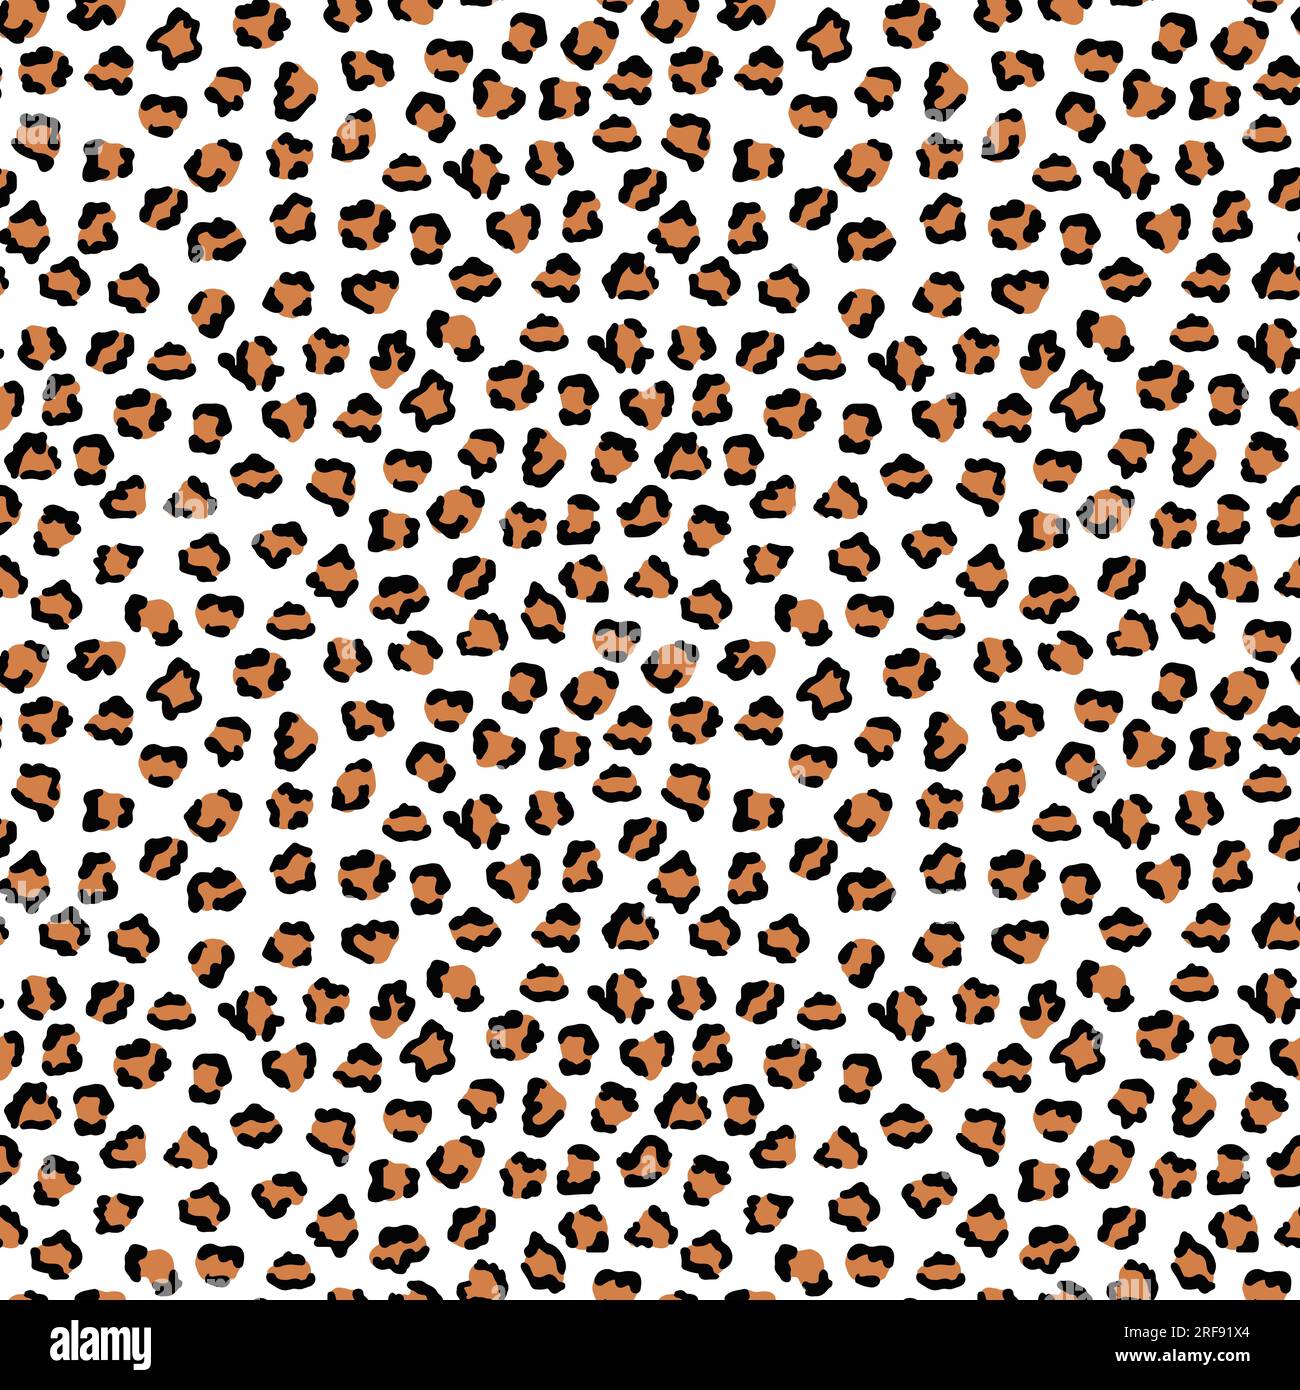 Seamless abstract pattern of leopard skin. Fur, skin, skin of a leopard, cheetah, jaguar. Fashion pattern. Seamless camouflage background for fabric, textile, design, cover, packaging. Stock Vector